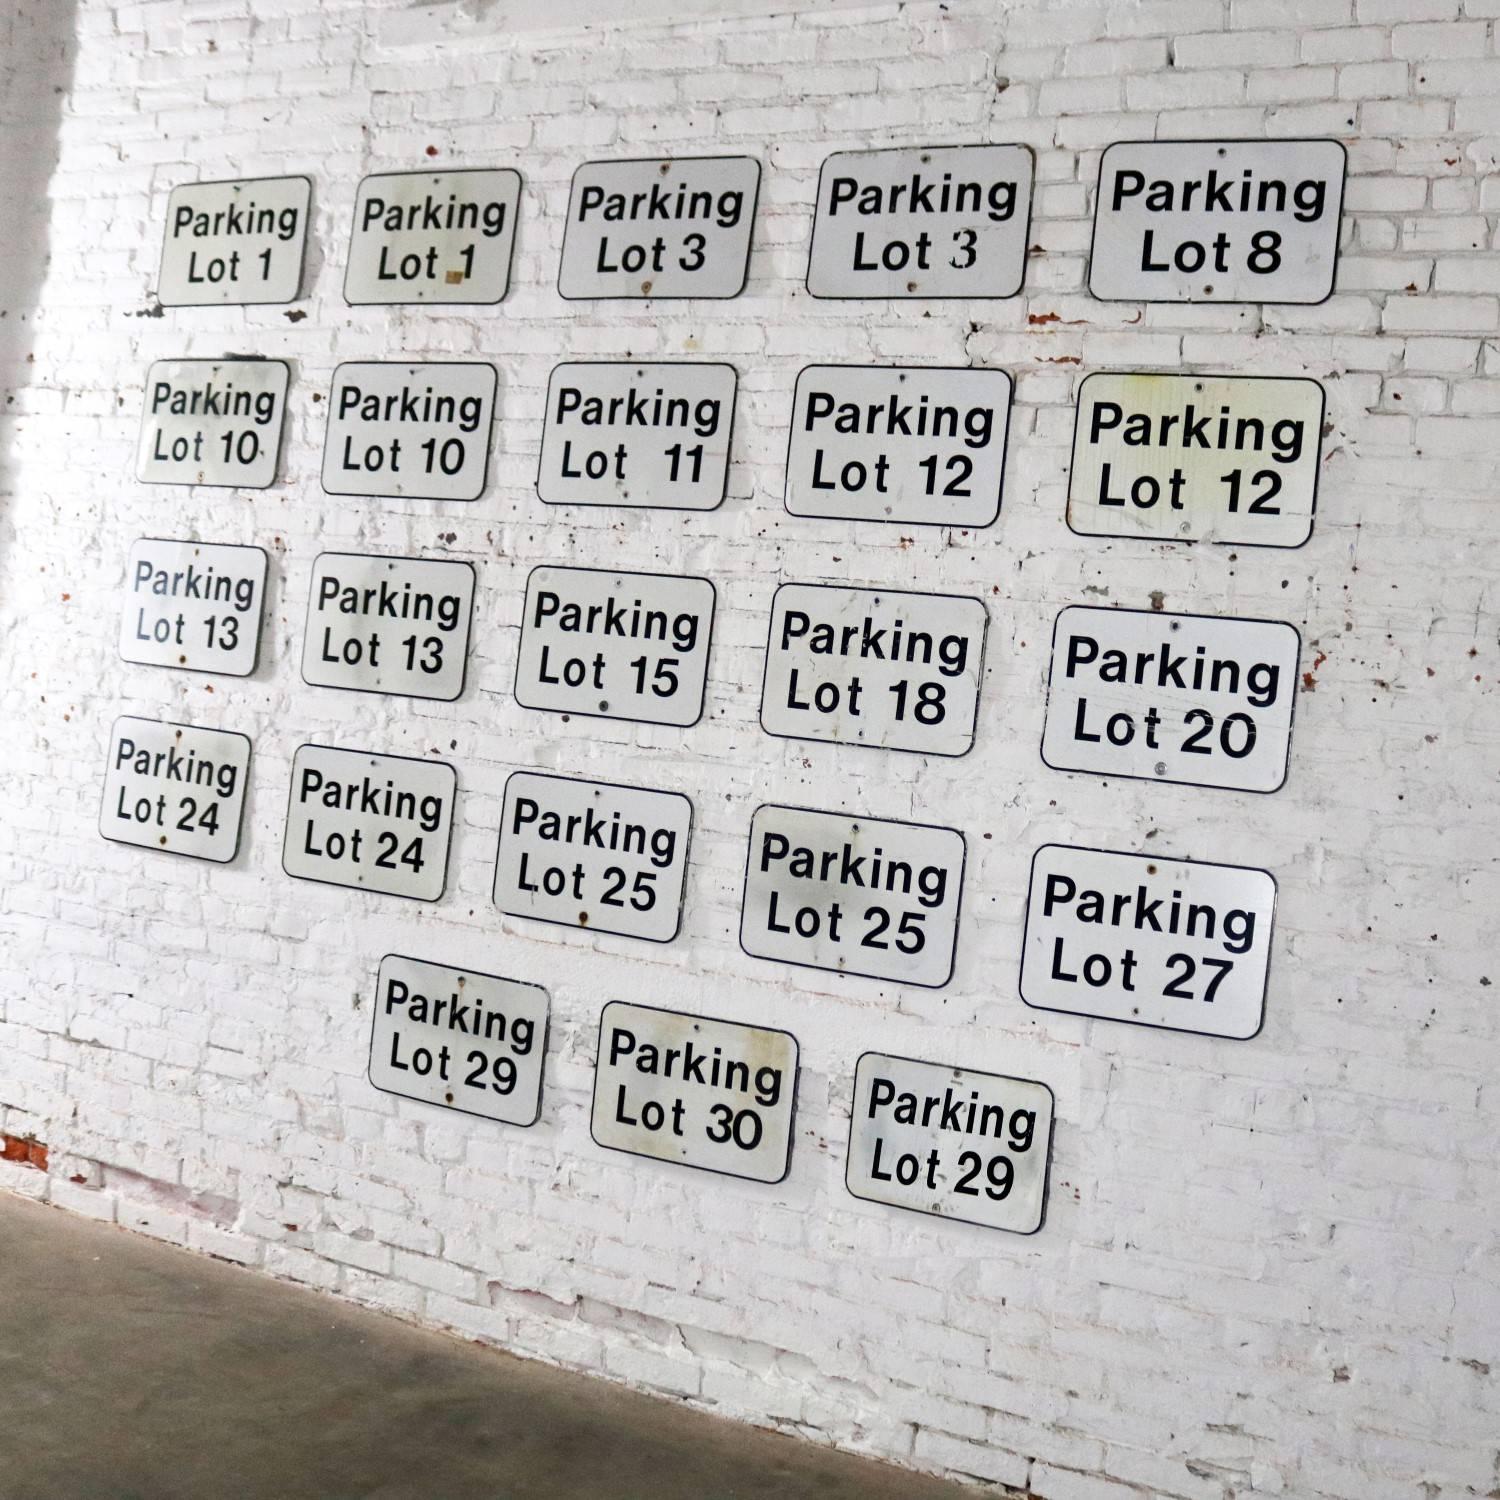 We are offering here 23 vintage metal parking lot number signs. They are in differing degrees of condition and patina but all wonderful. We have priced them per sign but will sell all 23 for $1900.00 or will give group pricing if desired, circa 20th